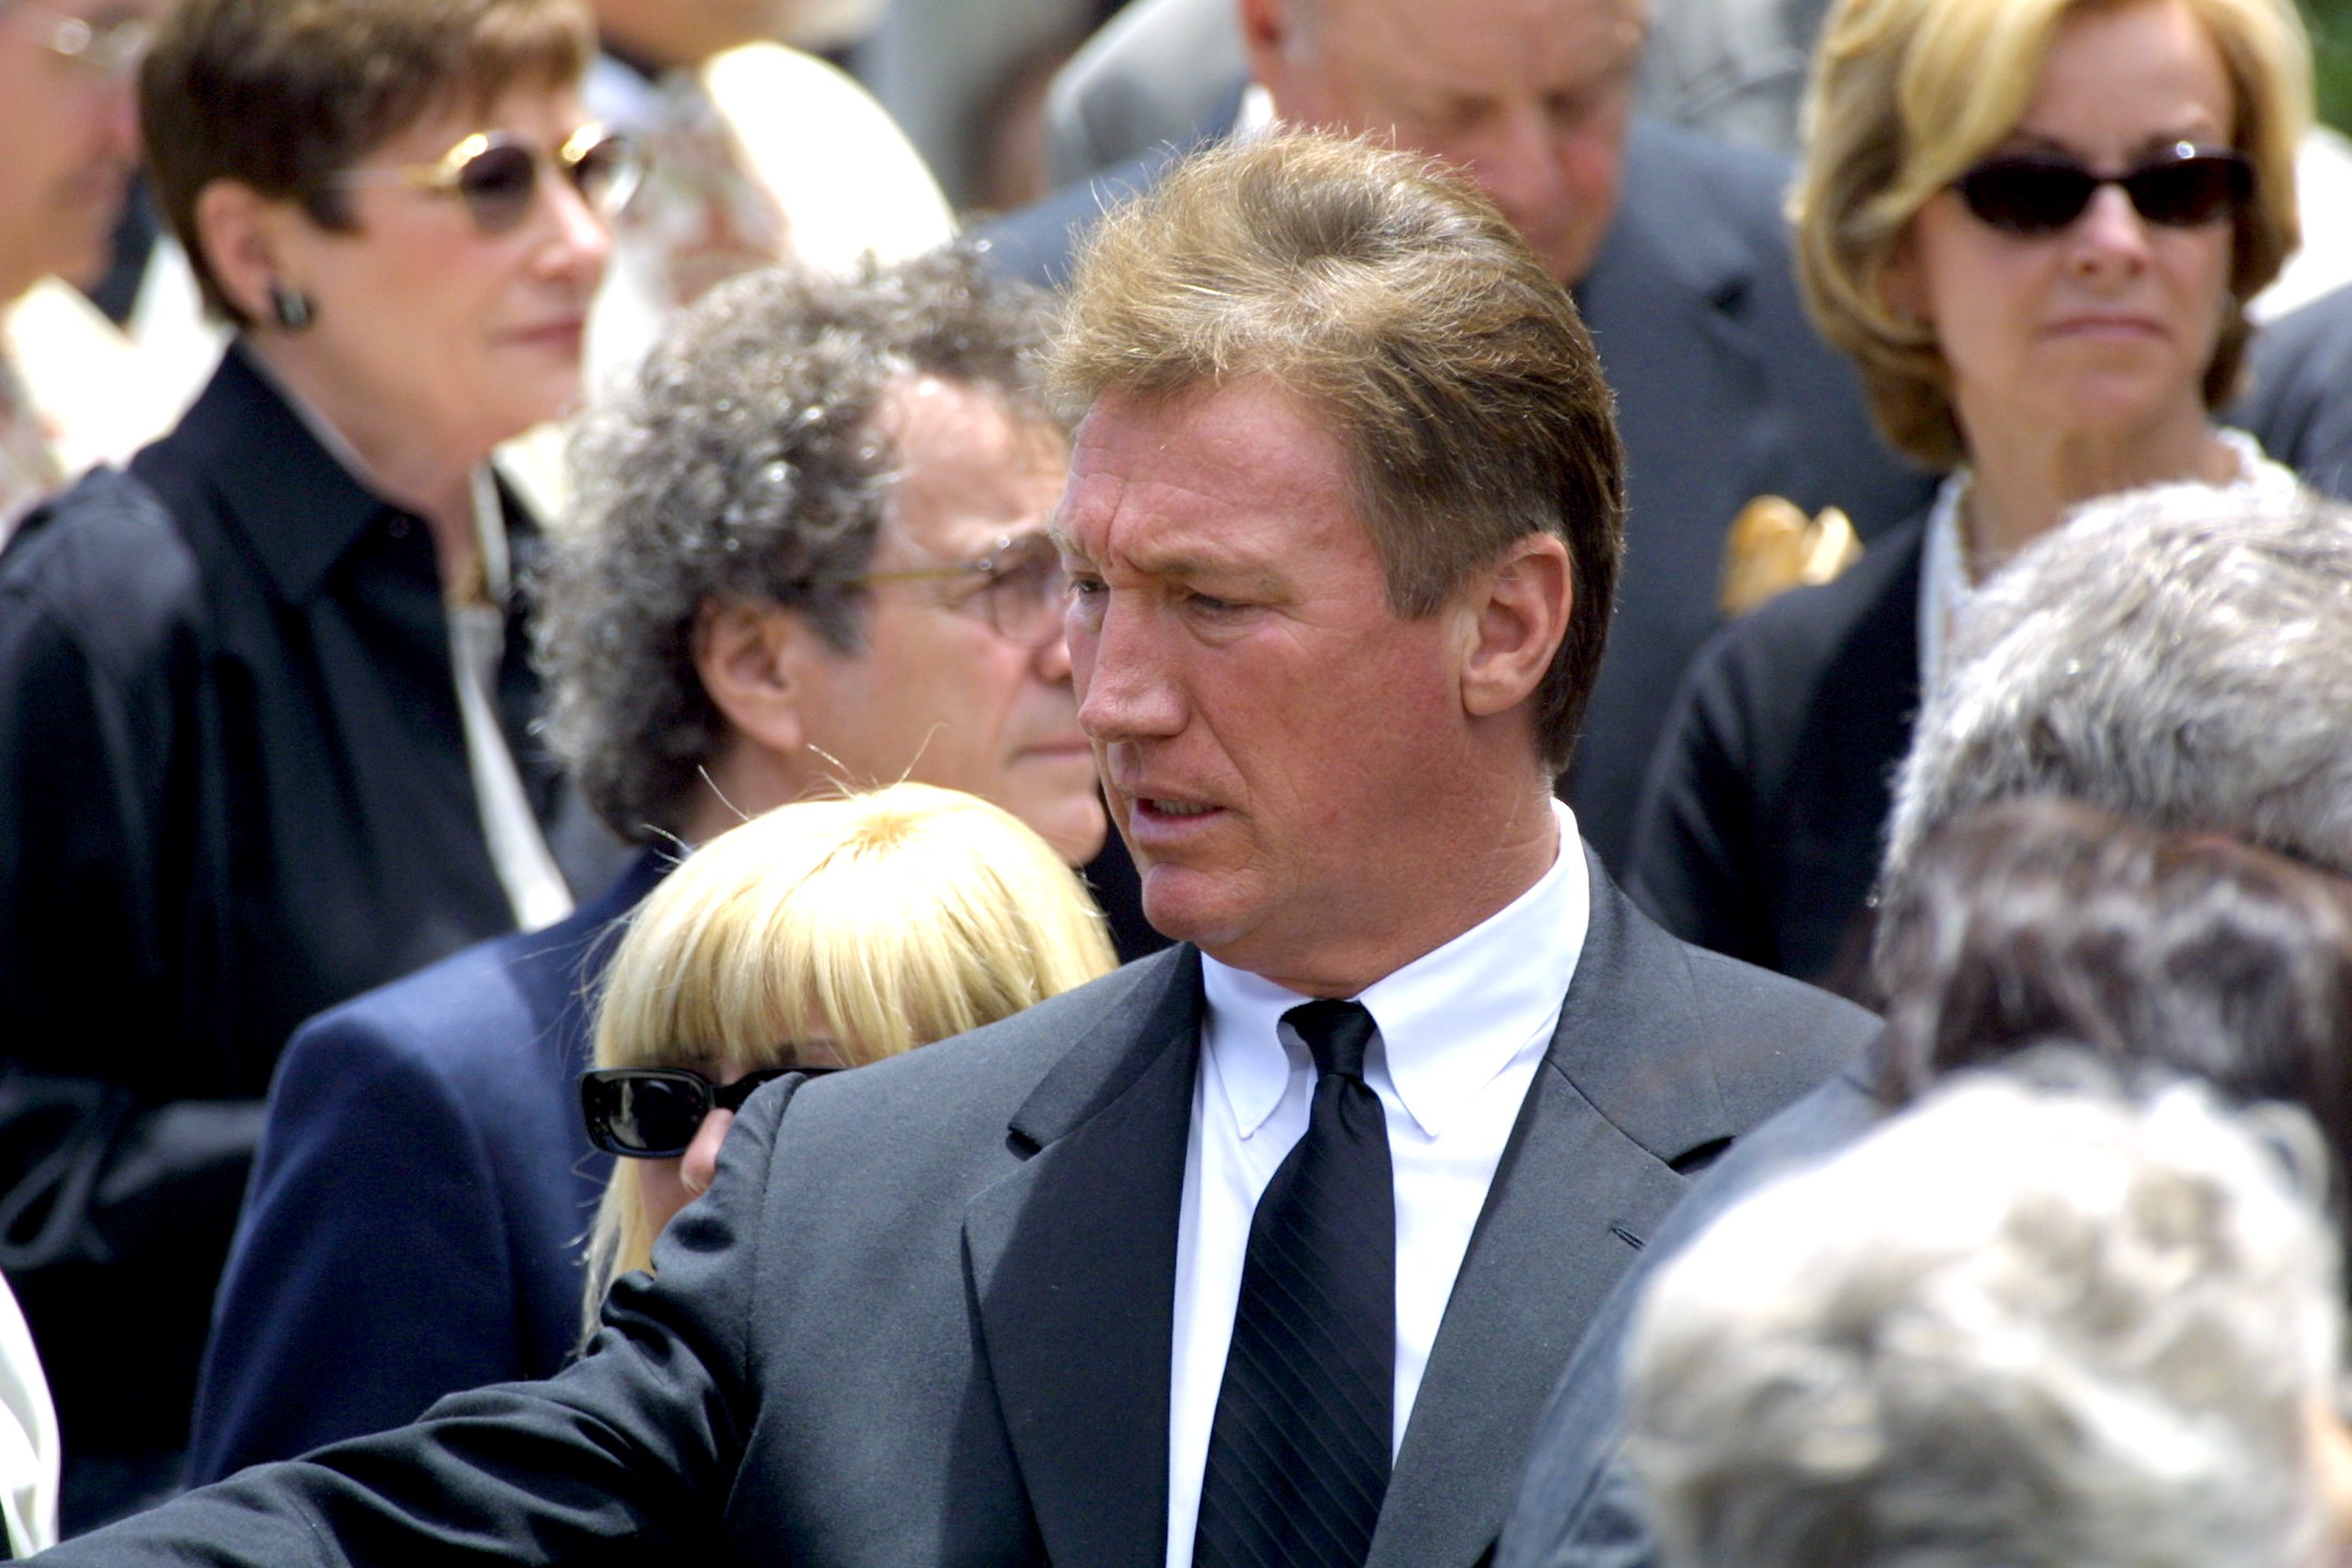 Alan Autry at\u00a0the funeral of Carroll O'Connor at St. Paul The Apostle Church in West Los Angeles, CA, on June 26, 2001 | Source: Getty Images